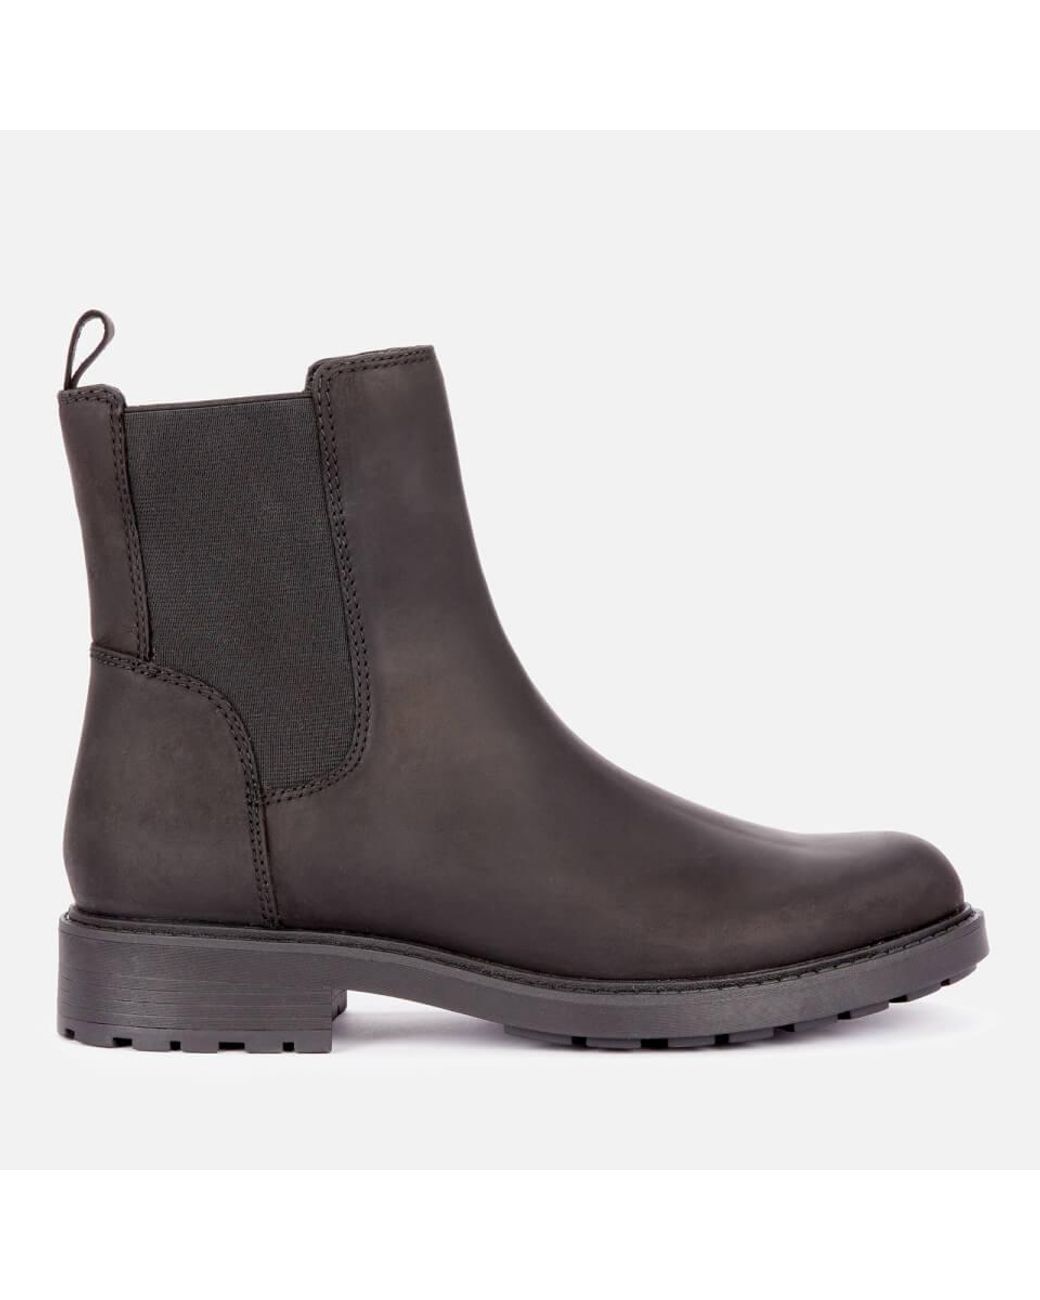 Clarks Orinoco 2 Top Leather Chelsea Boots in Black - Lyst